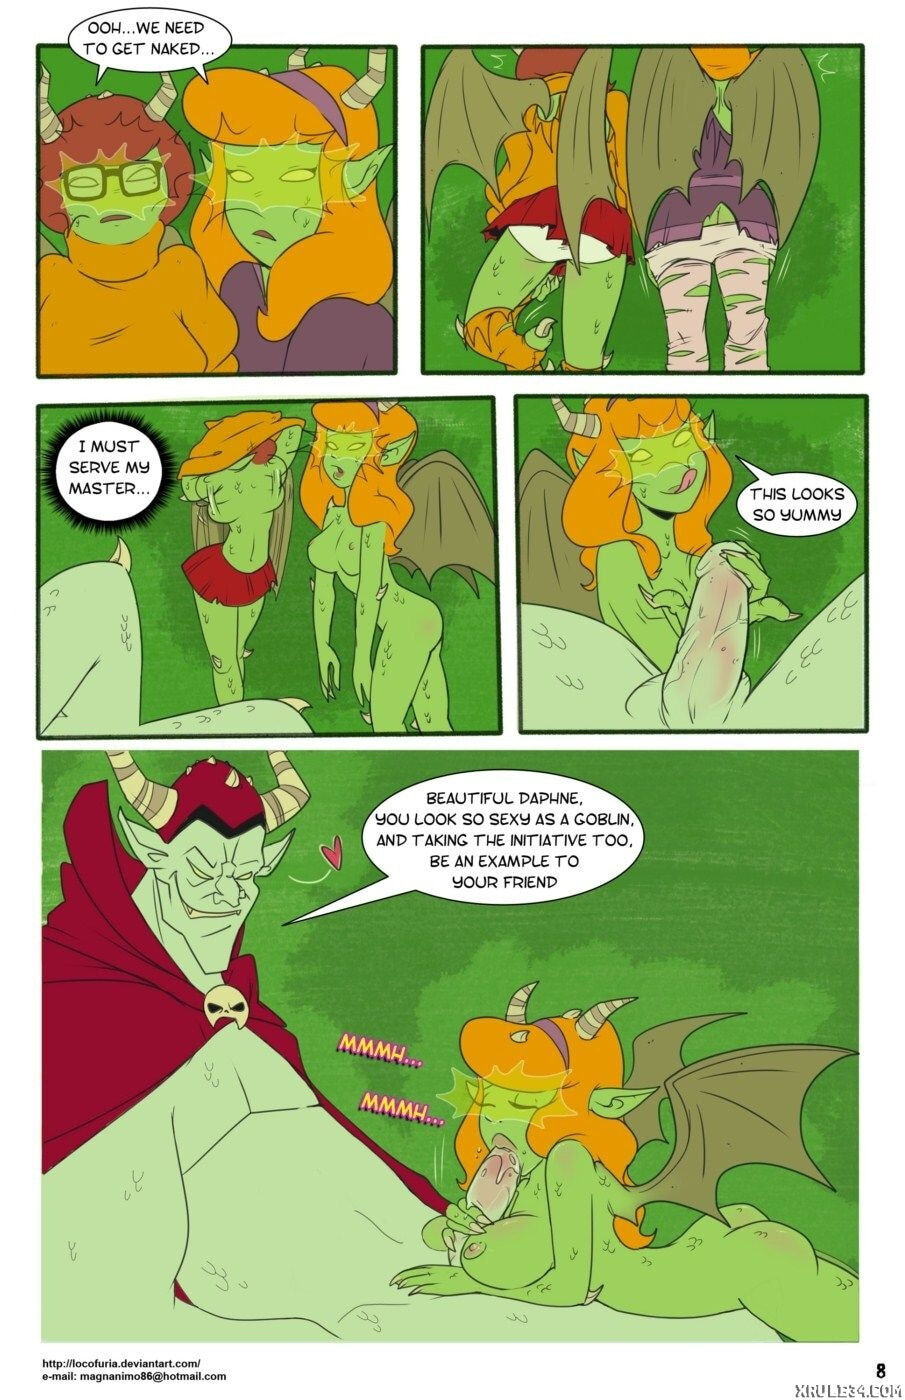 The Goblin King - Page 9